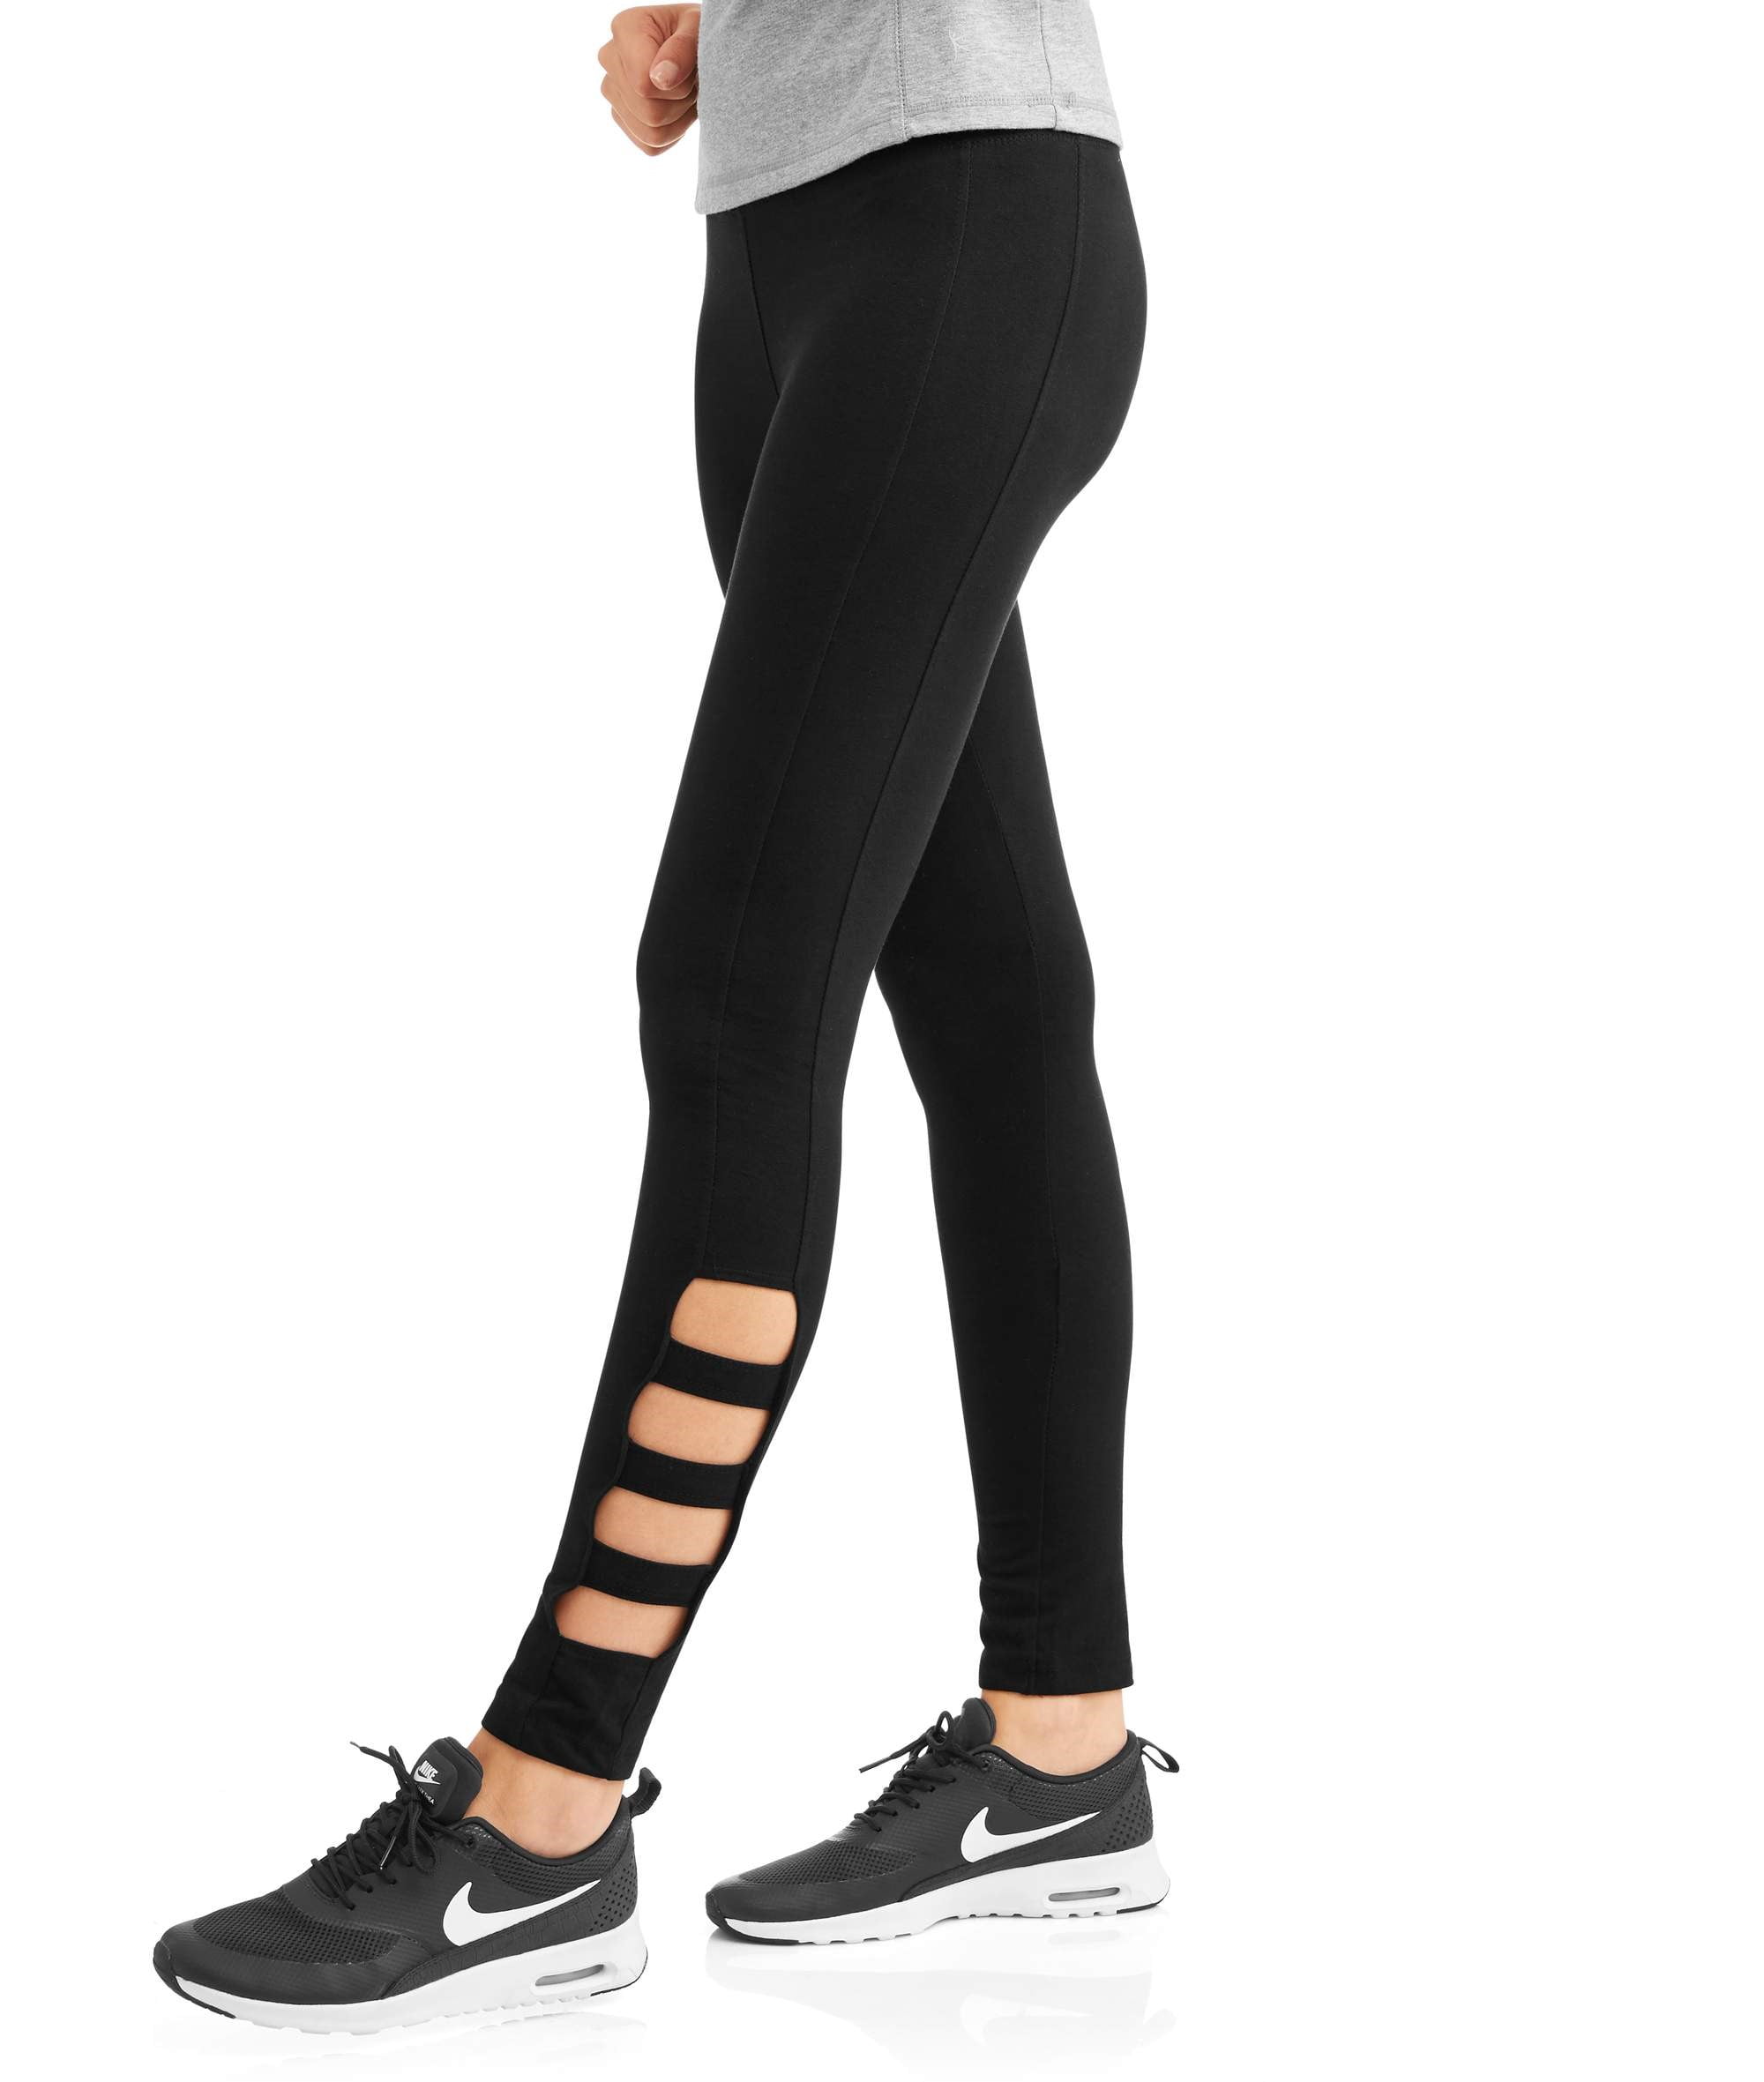 French Laundry Women's Active Performance Legging with Stacked Ankle Cutout  